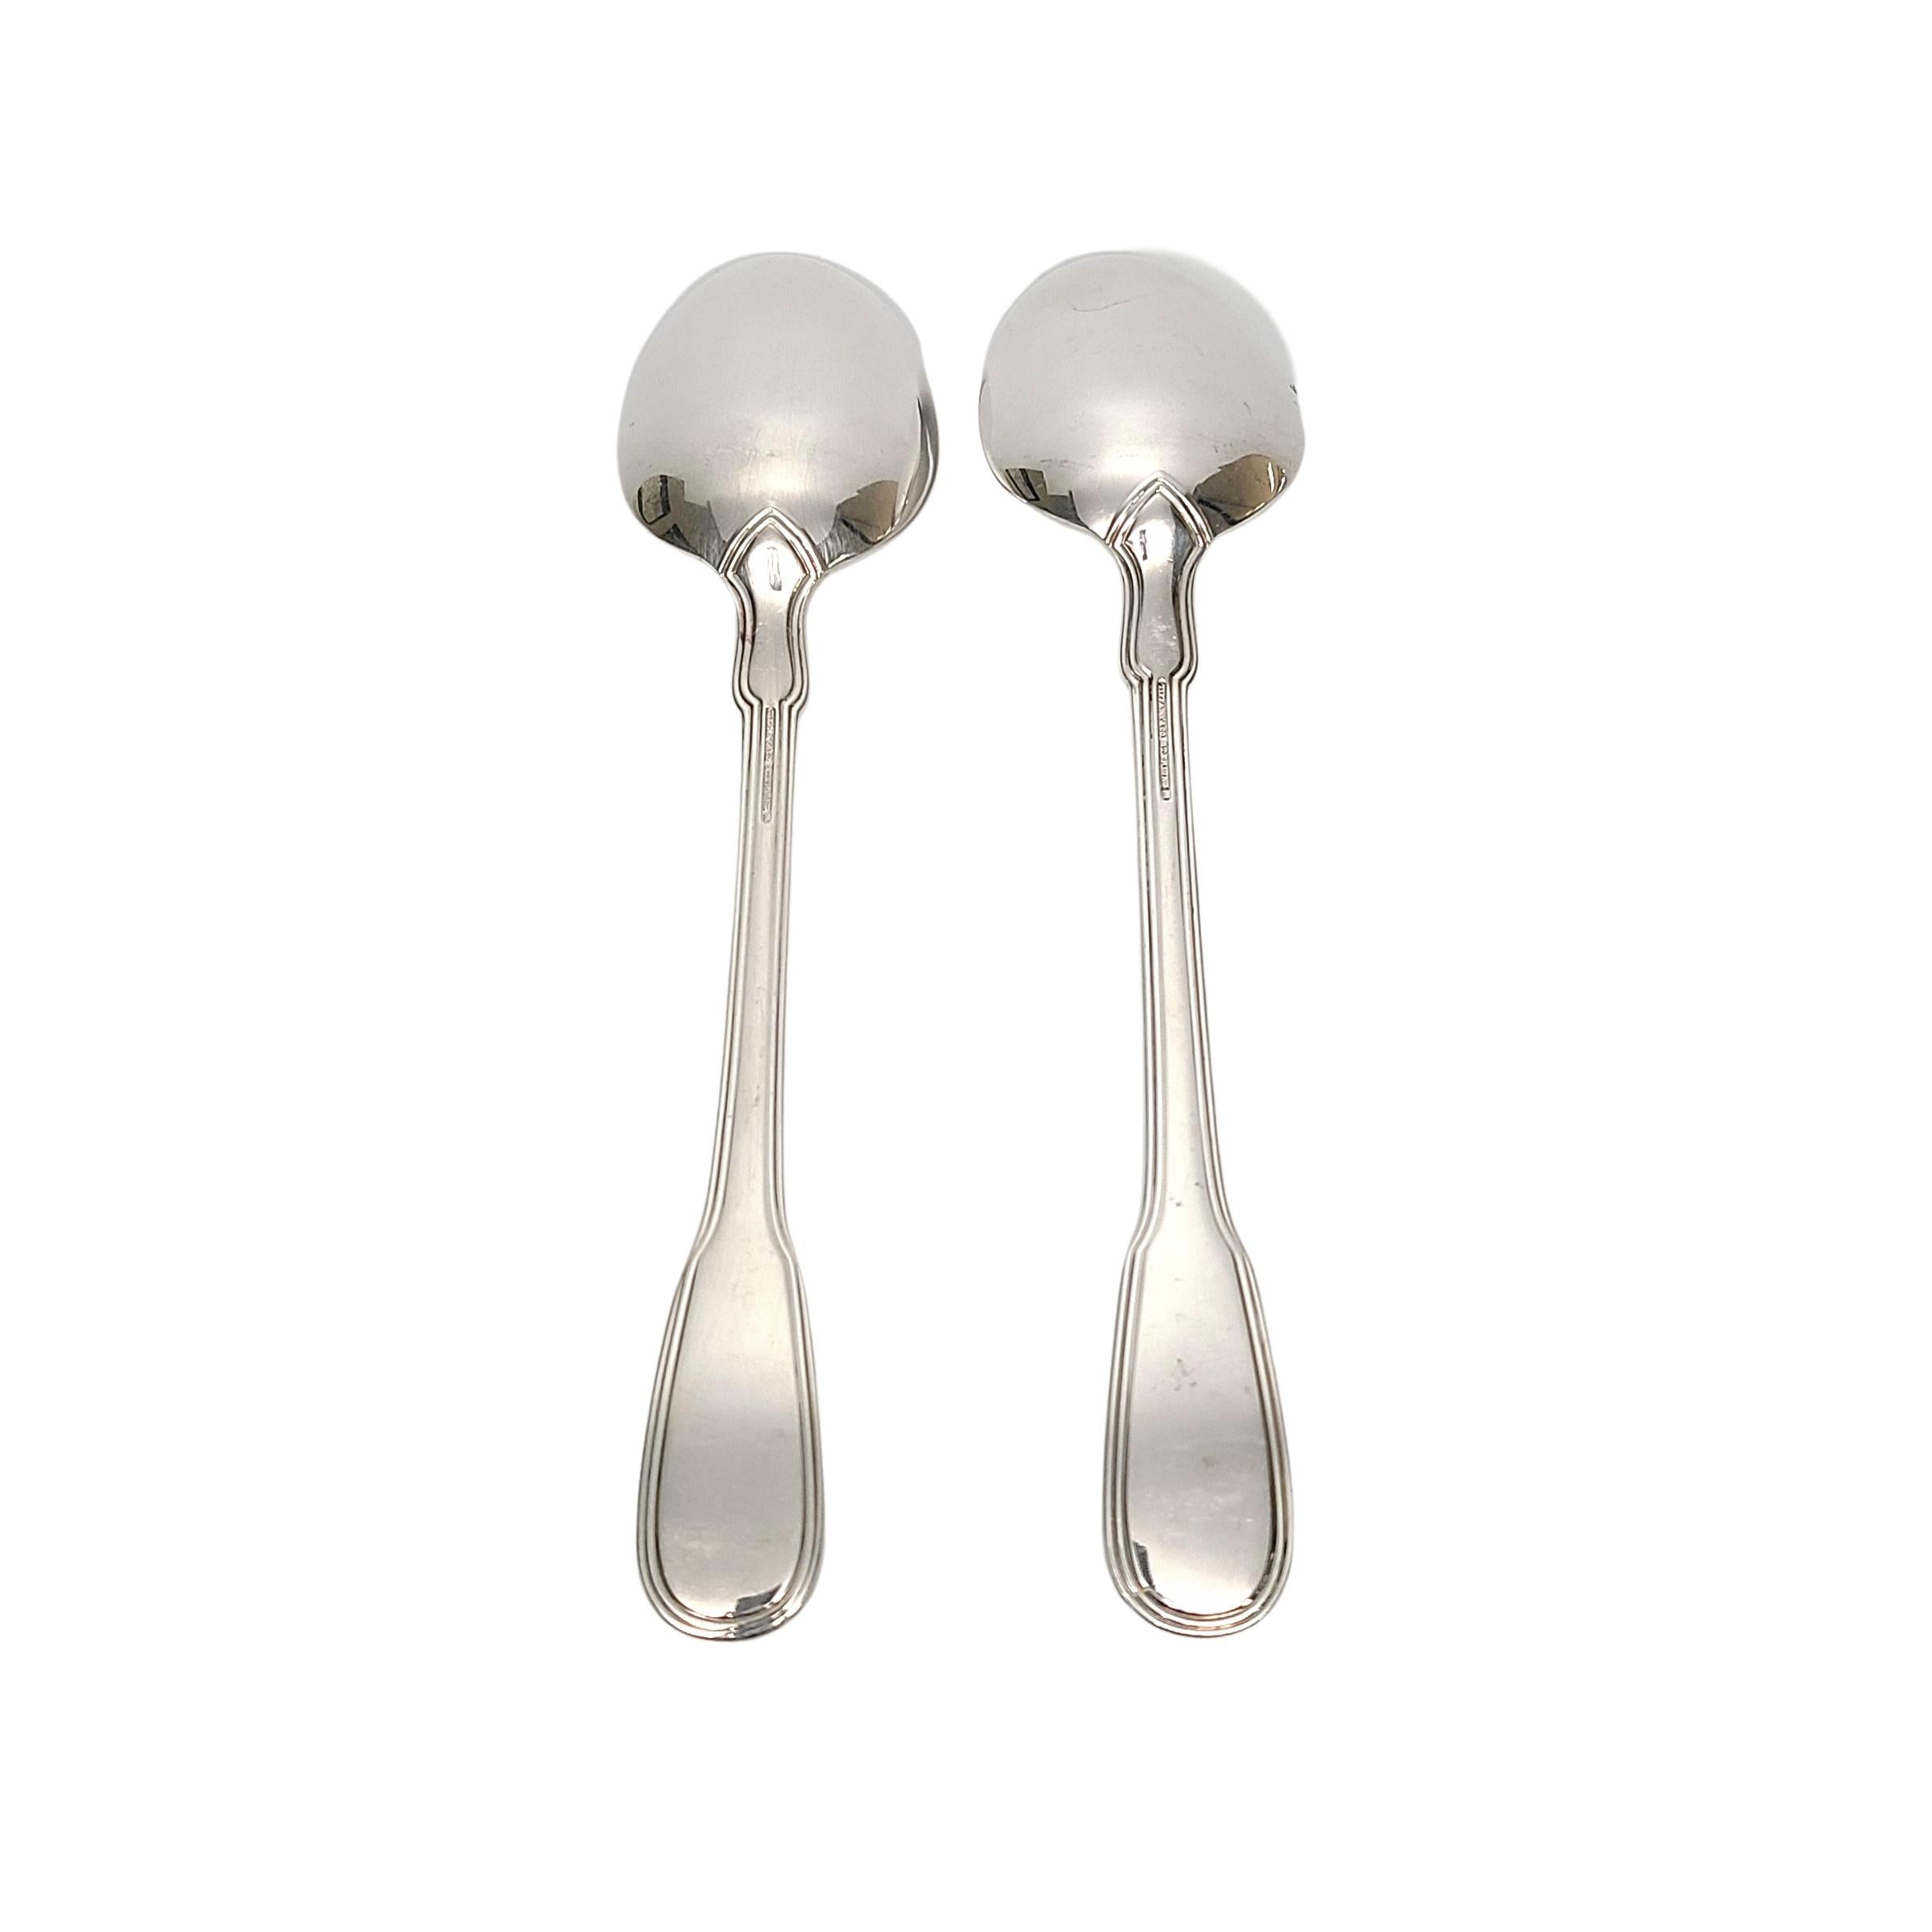 Set of 2 sterling silver serving tablespoons by Tiffany & Co in the Gramercy pattern.

Monogram appears to be LTR

2 large serving/tablespoons in the Gramercy pattern, designed by Arthur LeRoy Barney in 1921, features a simple outline design on the